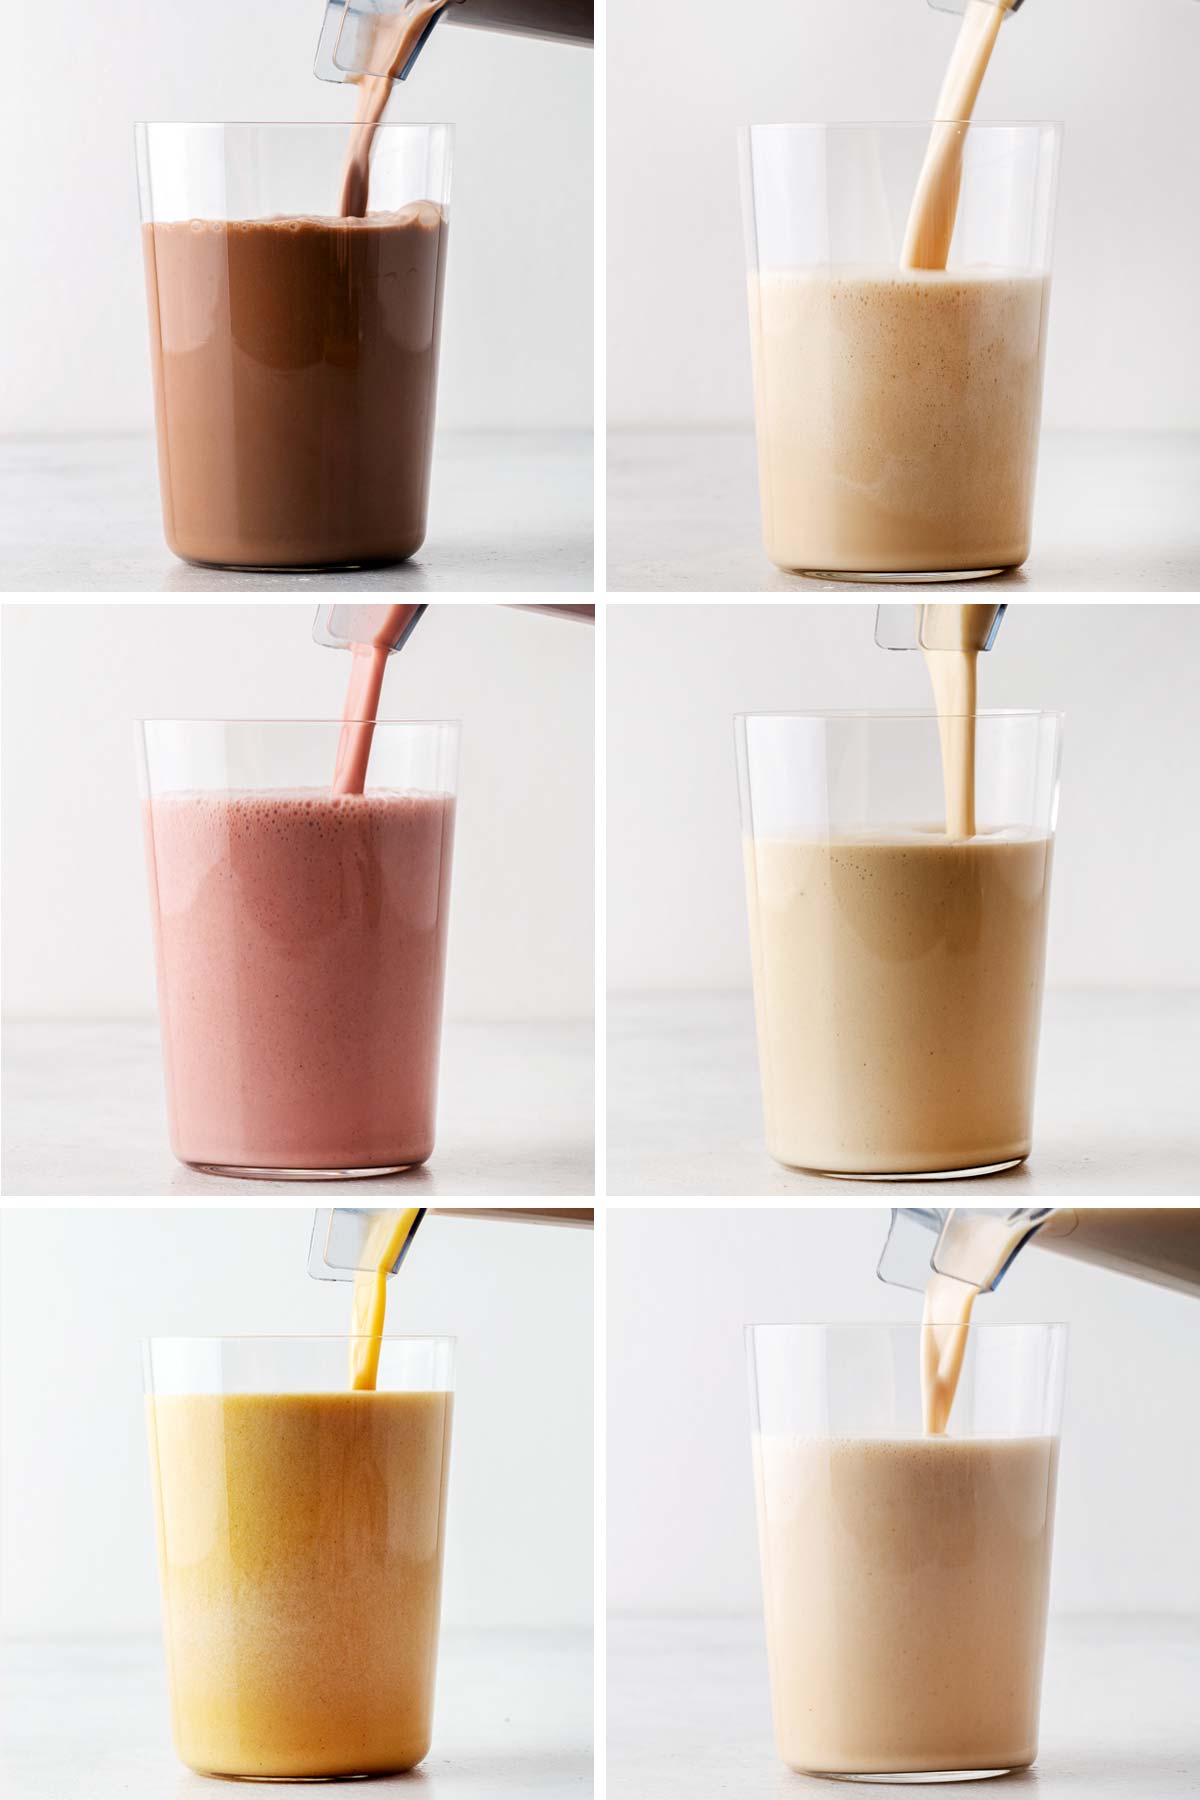 Six different protein shakes.